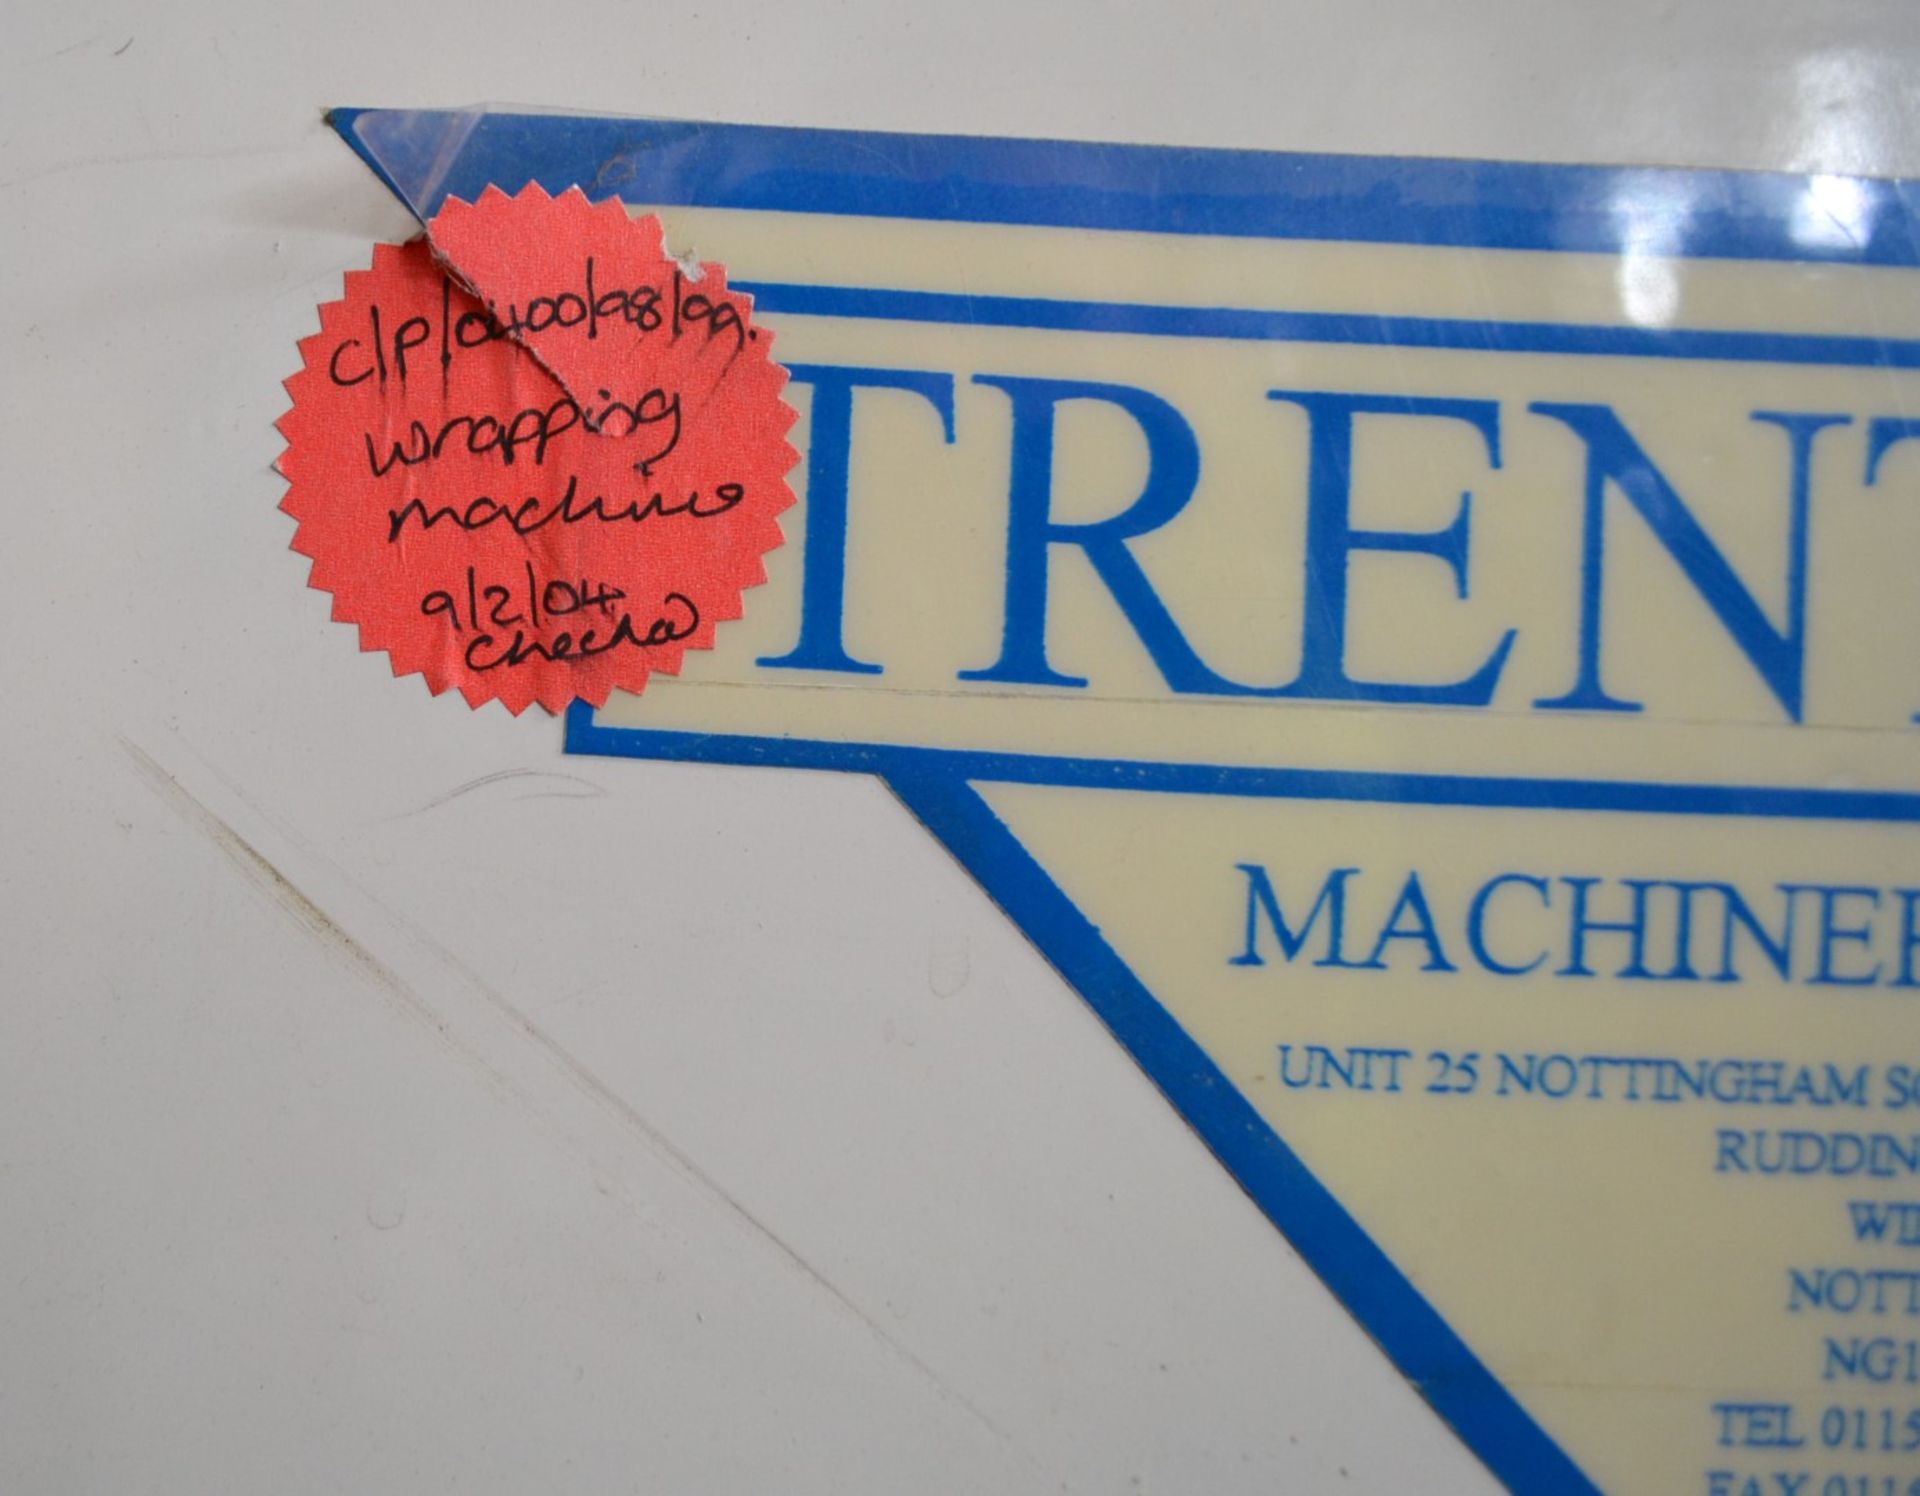 1 x Trentpack Shrink Wrapping Machine - CL185 - Ref: TPSW - Location: Stoke-on-Trent ST3 Item is - Image 3 of 21